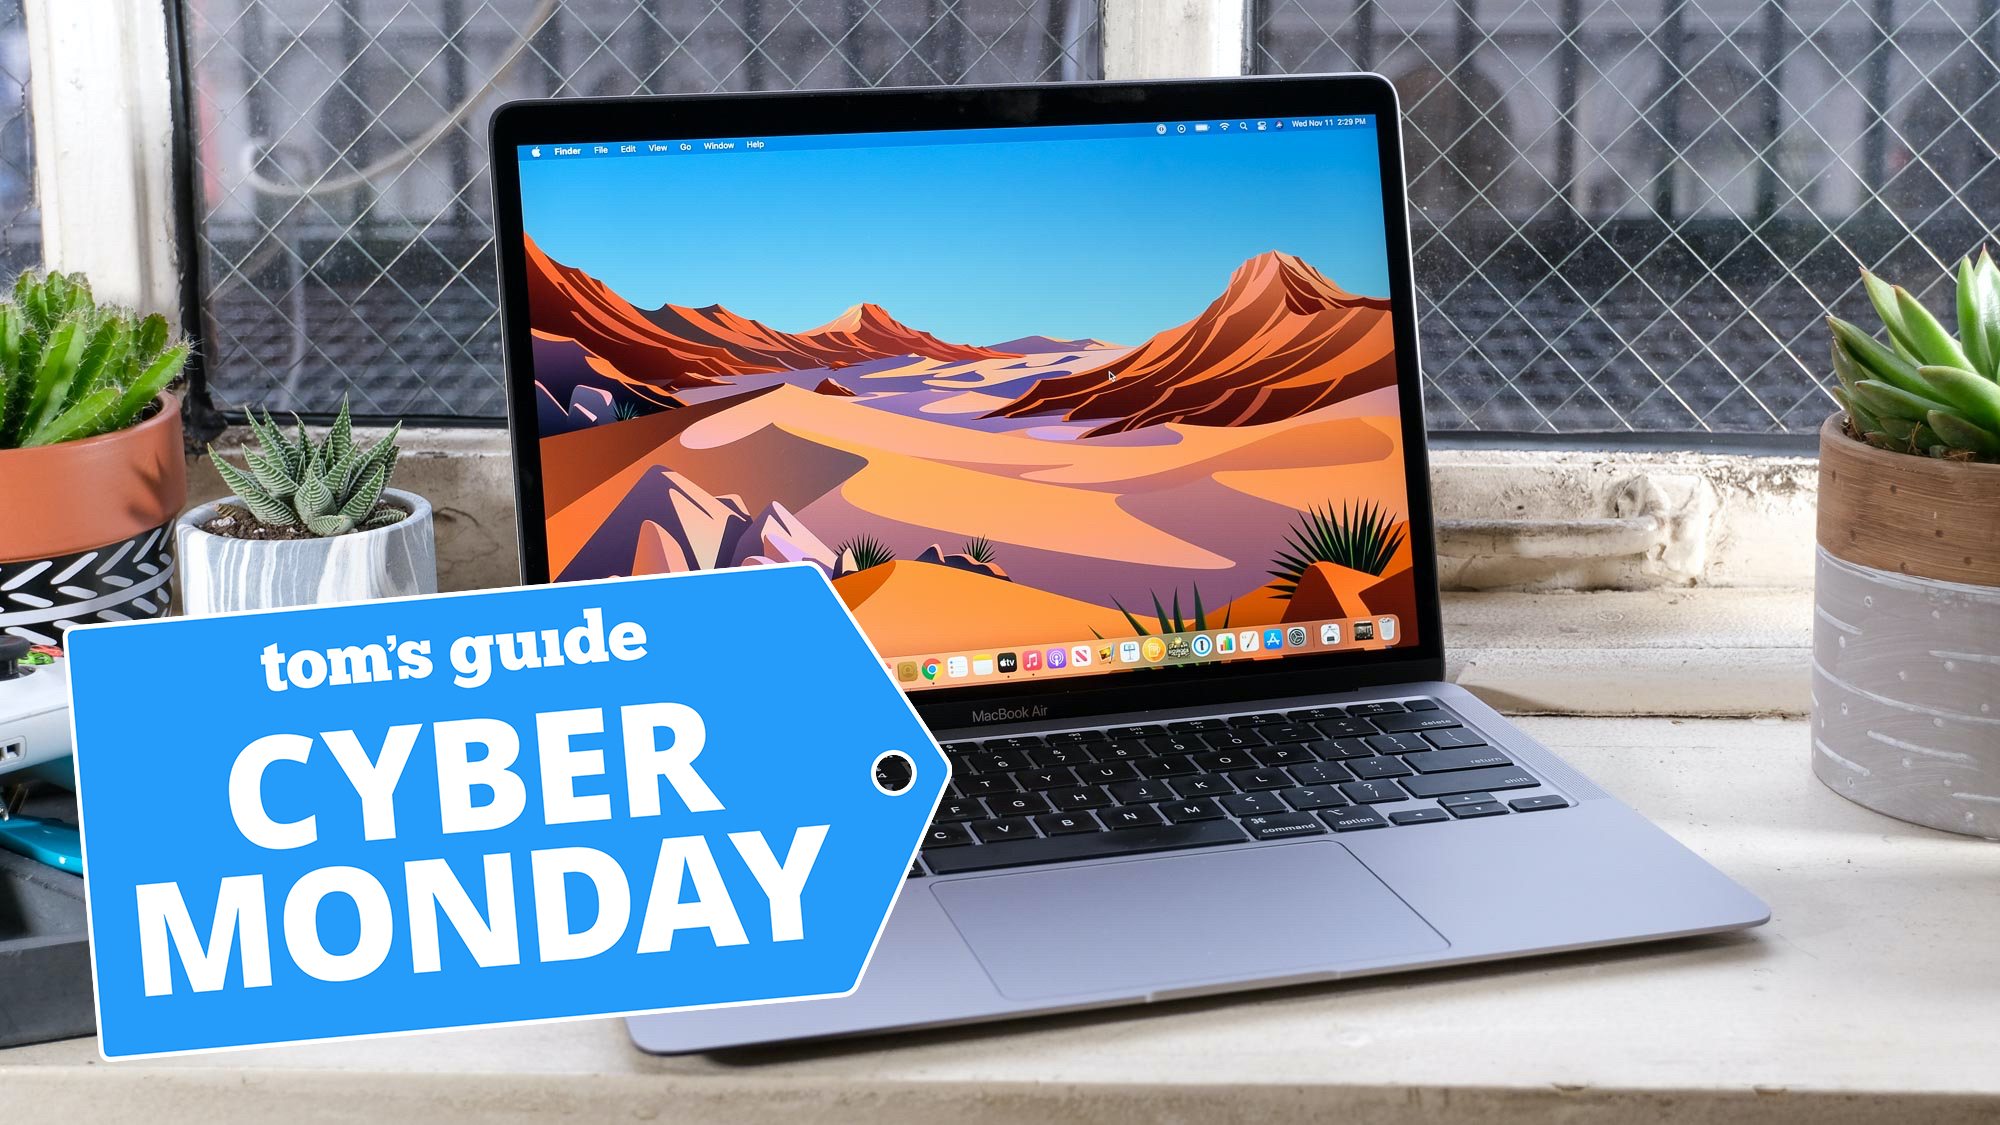 Macbook Air M1 with Cyber Monday badge